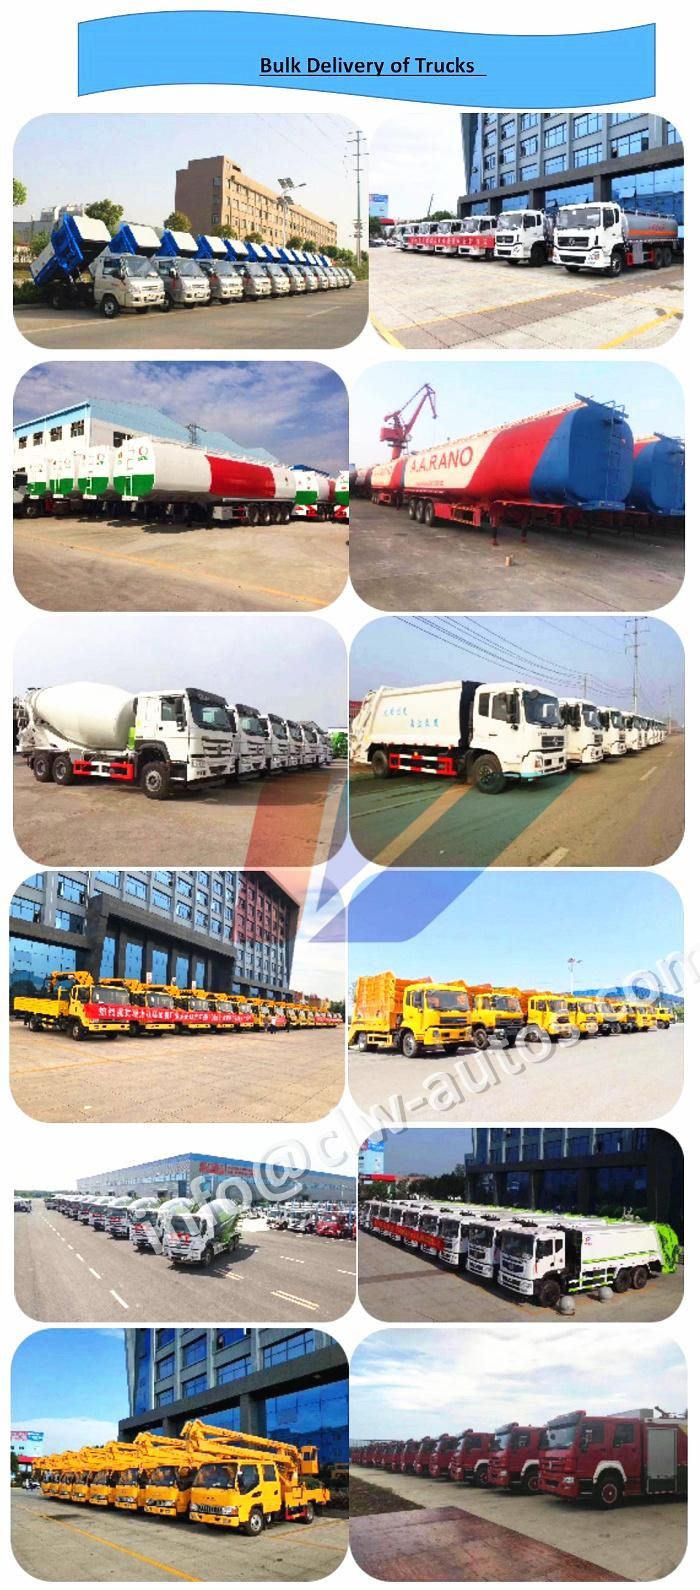 Small 4cbm 5cbm Forland Inner City Garbage Compactor Truck for Steel Container Plastic Trash Bin Lifting with Hydraulic Dumping